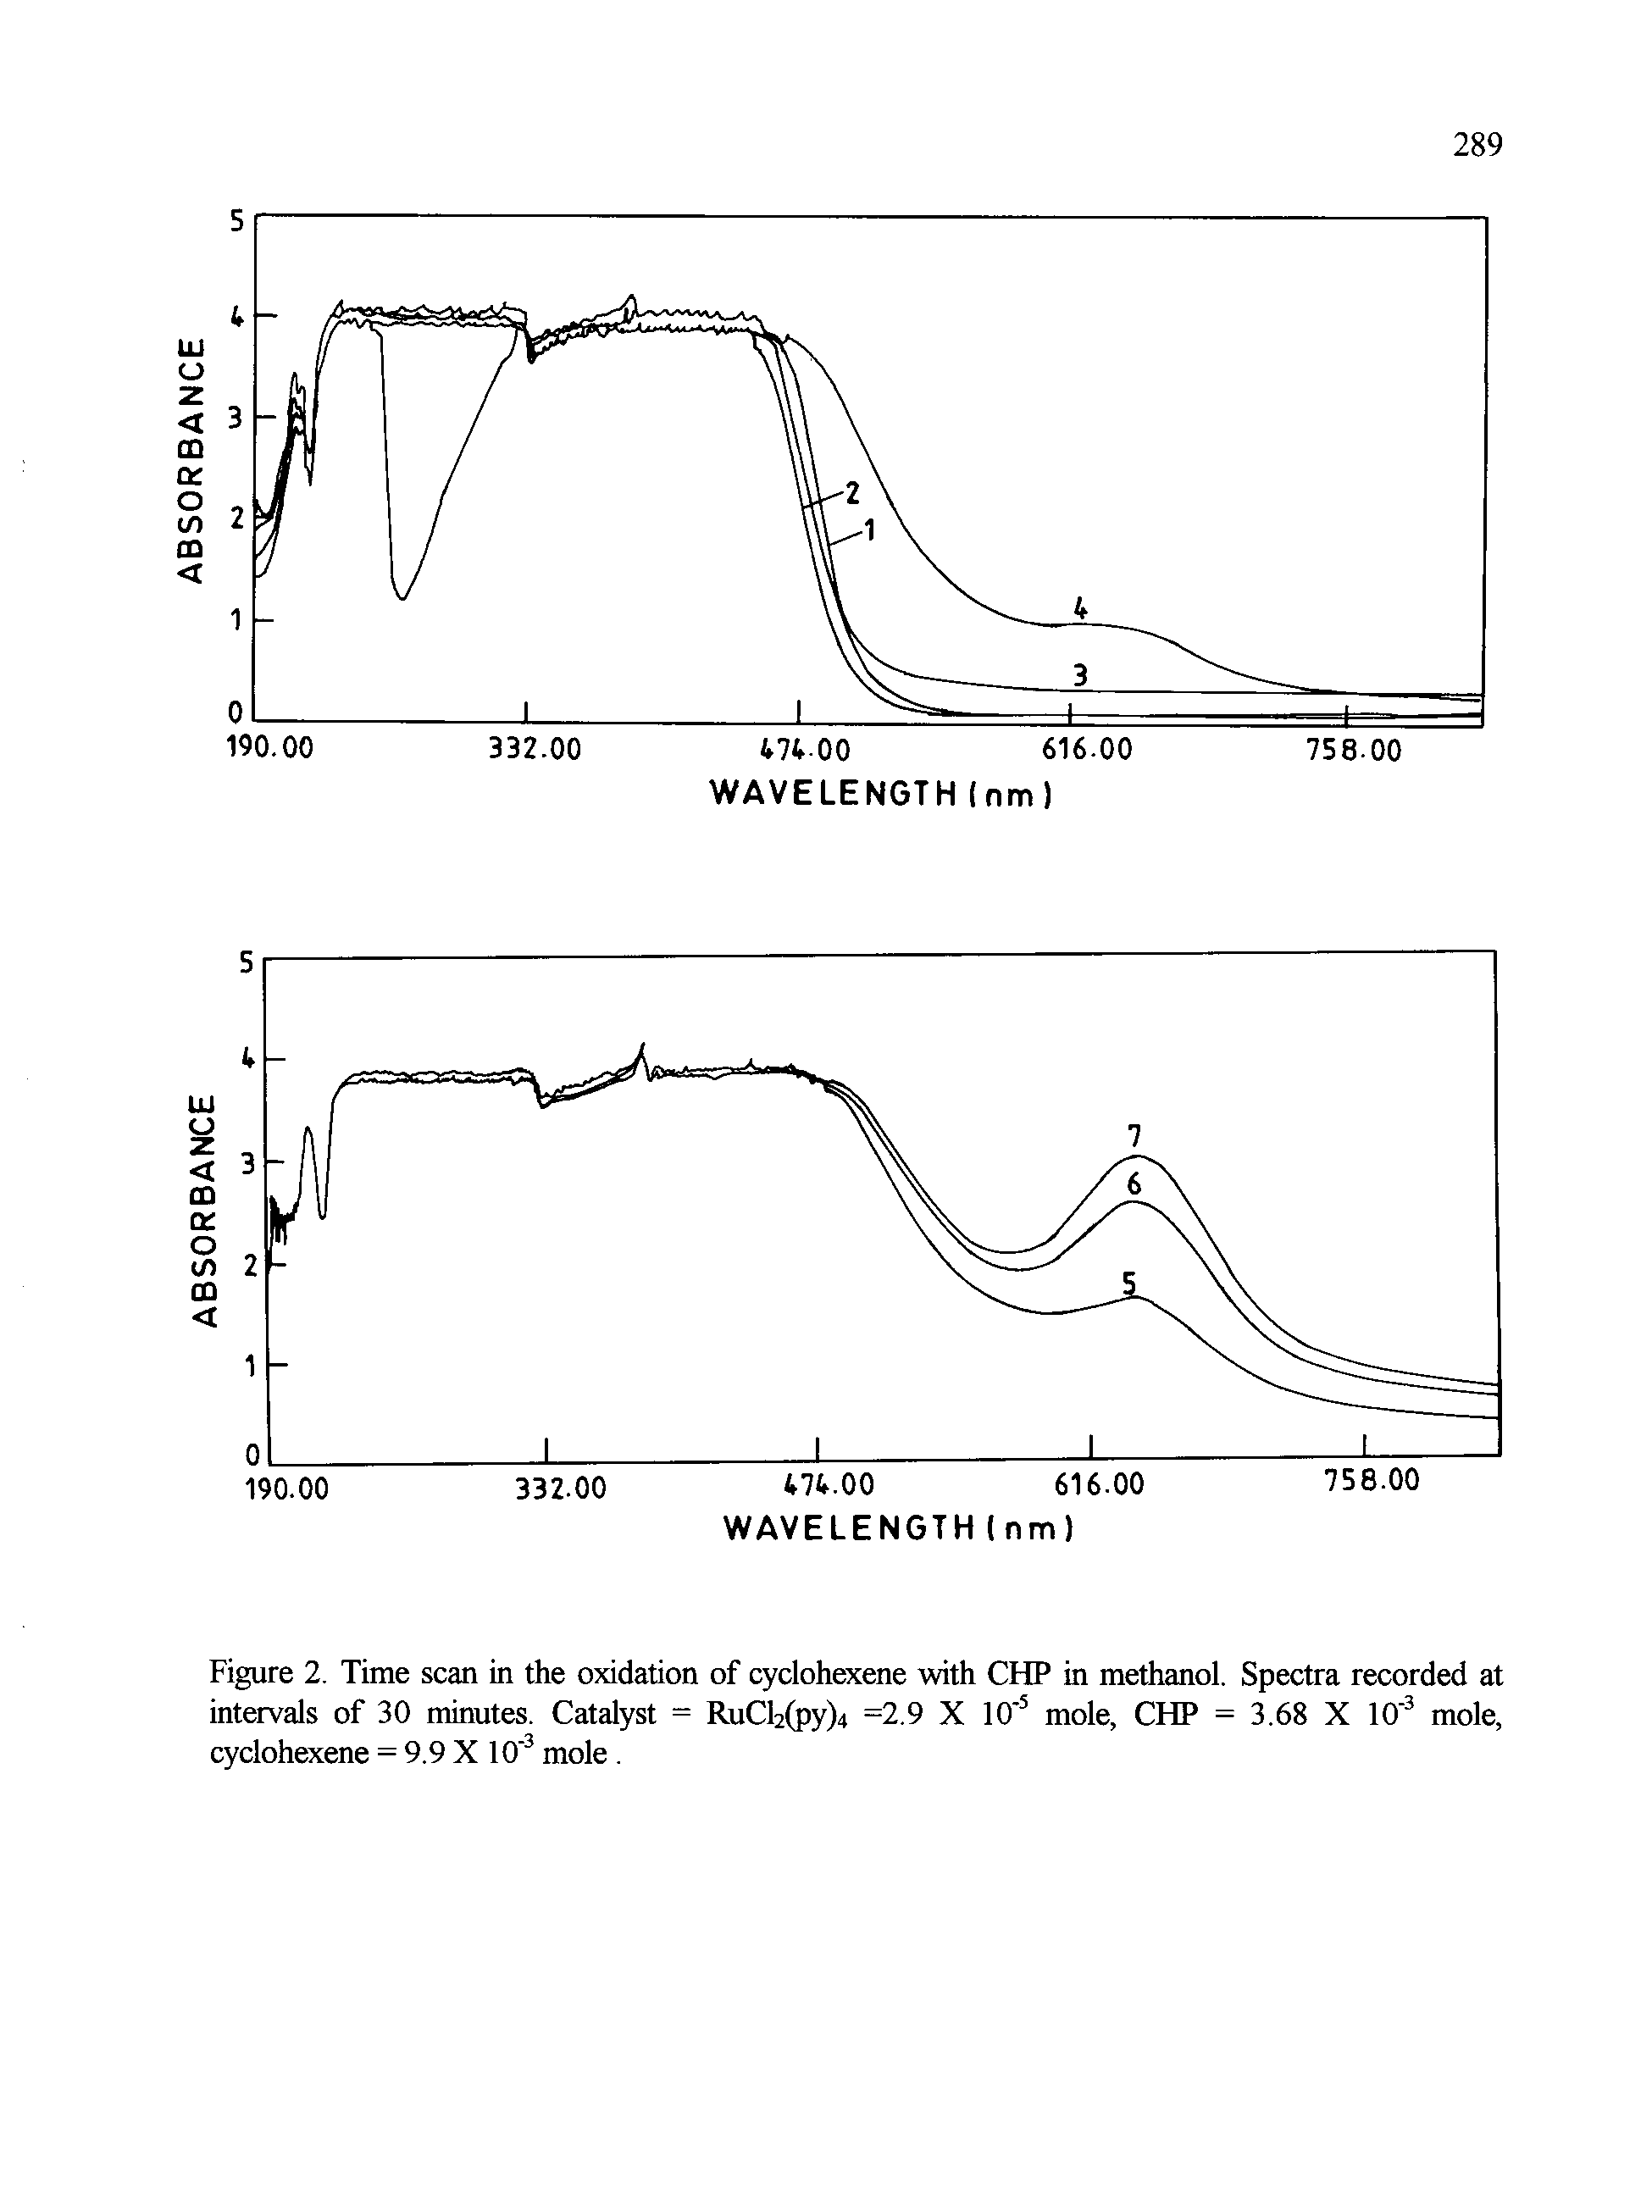 Figure 2. Time scan in the oxidation of cyclohexene with CUP in methanol. Spectra recorded at intervals of 30 minutes. Catalyst = RuCl2(py)4 =2.9 X 10 mole, CHP = 3.68 X 10 mole, cyclohexene = 9.9 X 10 mole. ...